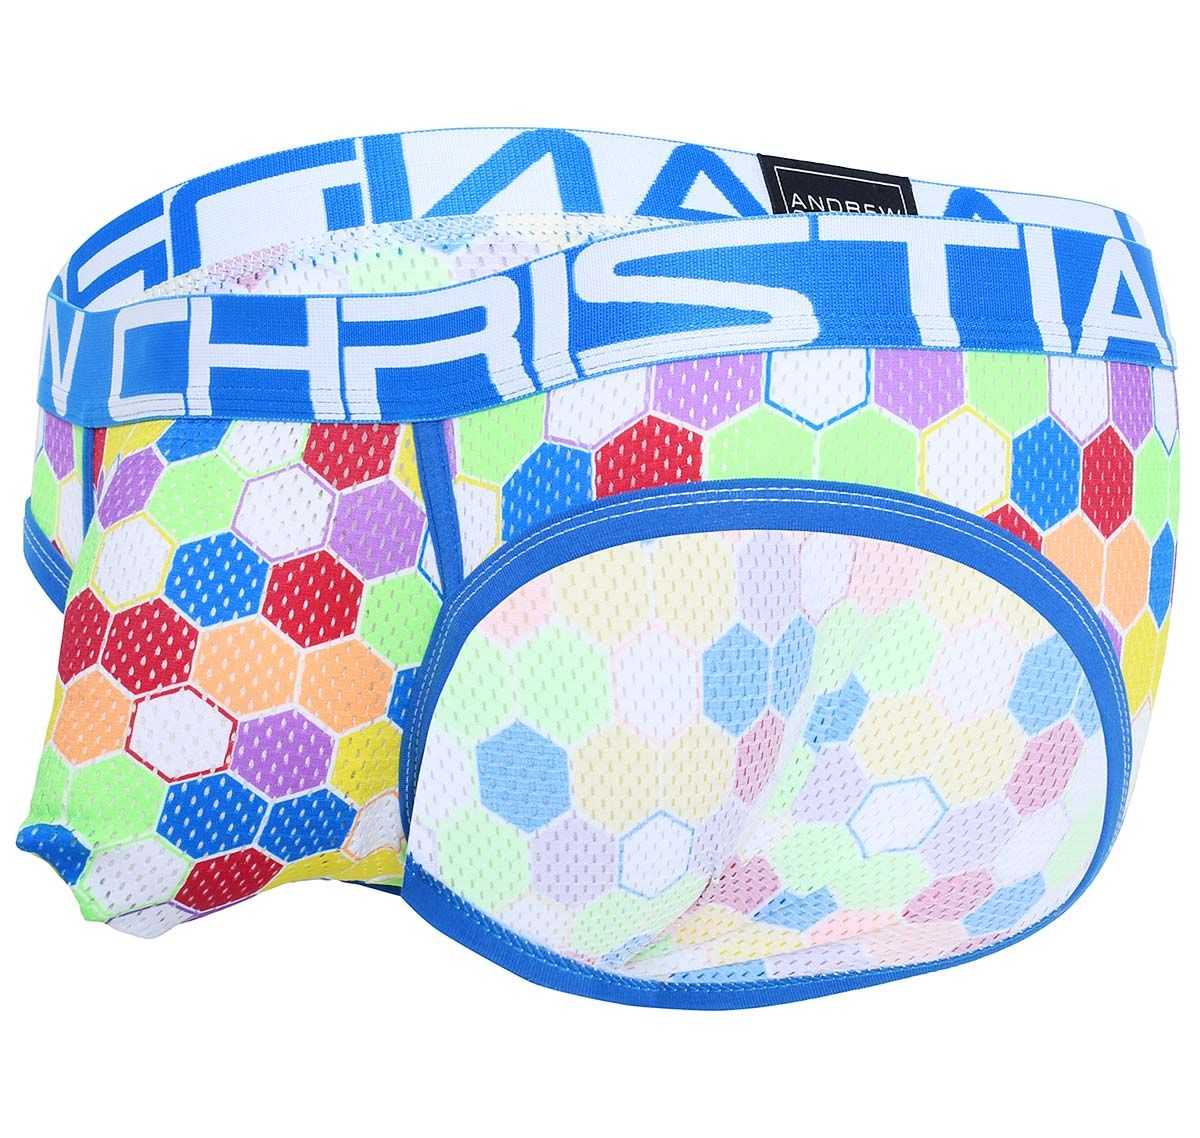 Andrew Christian Slip PRIDE HONEYCOMB MESH BRIEF w/ ALMOST NAKED 91800, multicolore